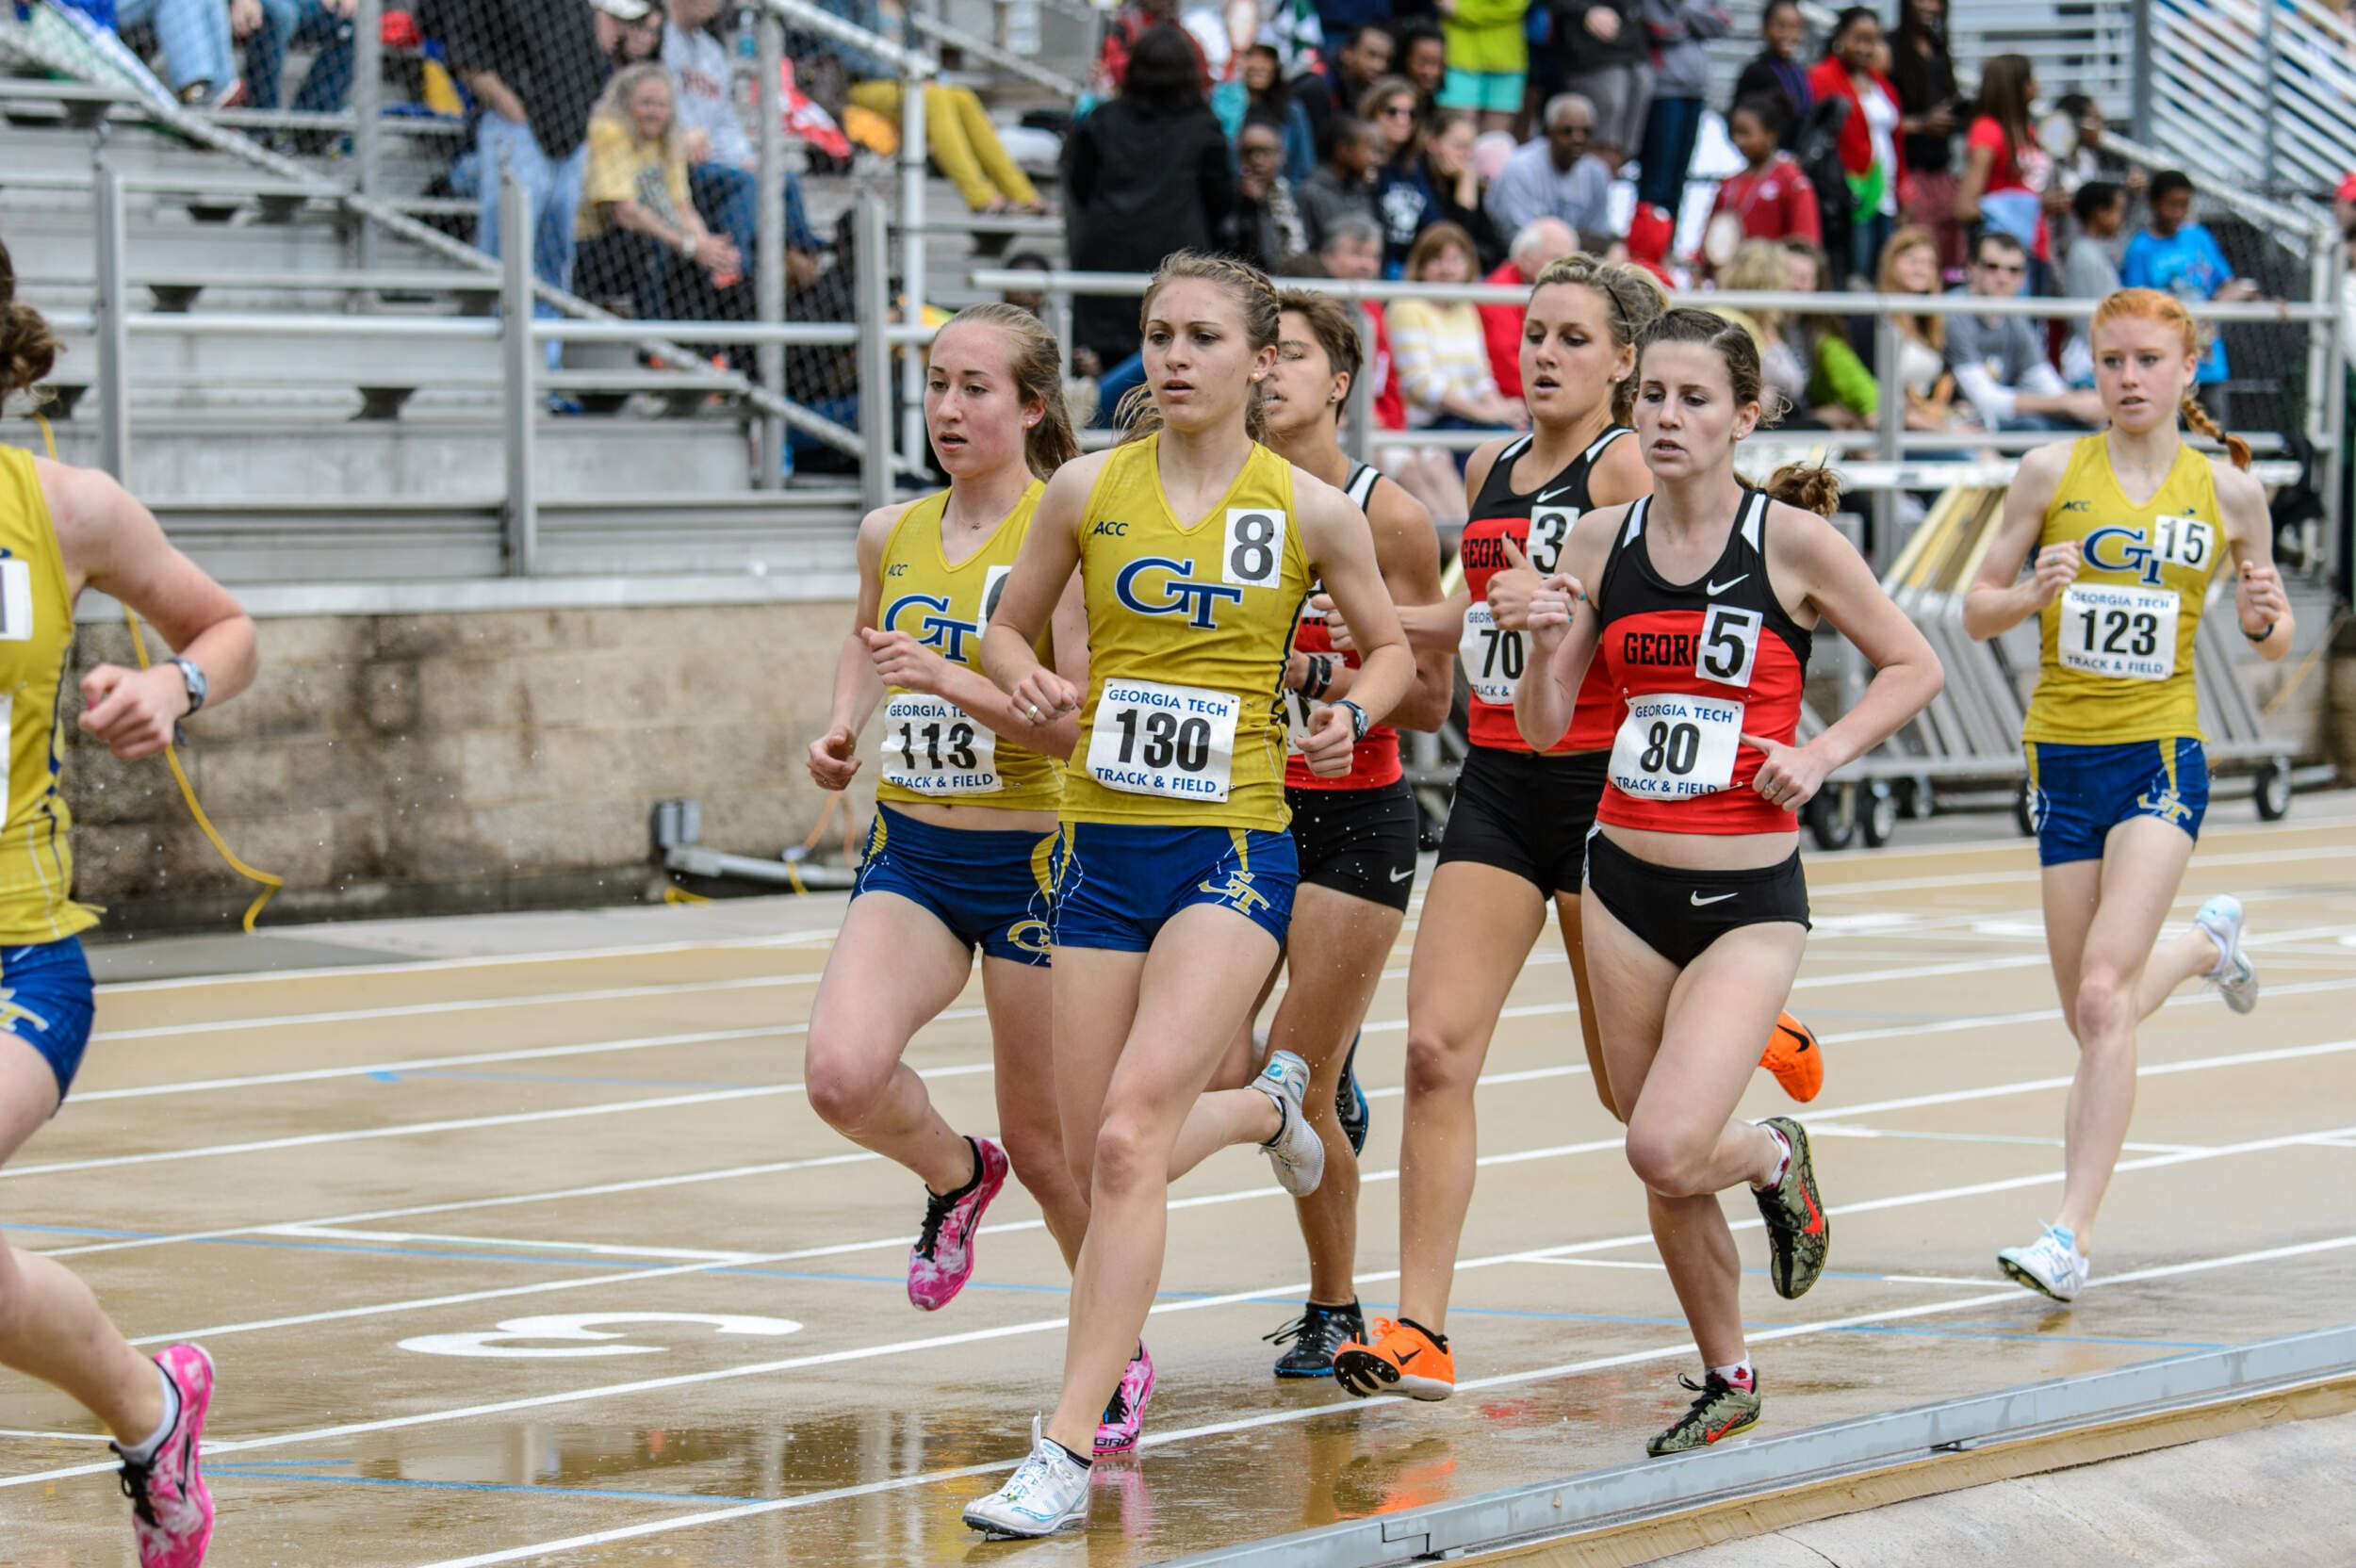 GCSC WELCOMES 2,000 ATHLETES FOR USA TRACK AND FIELD NATIONAL